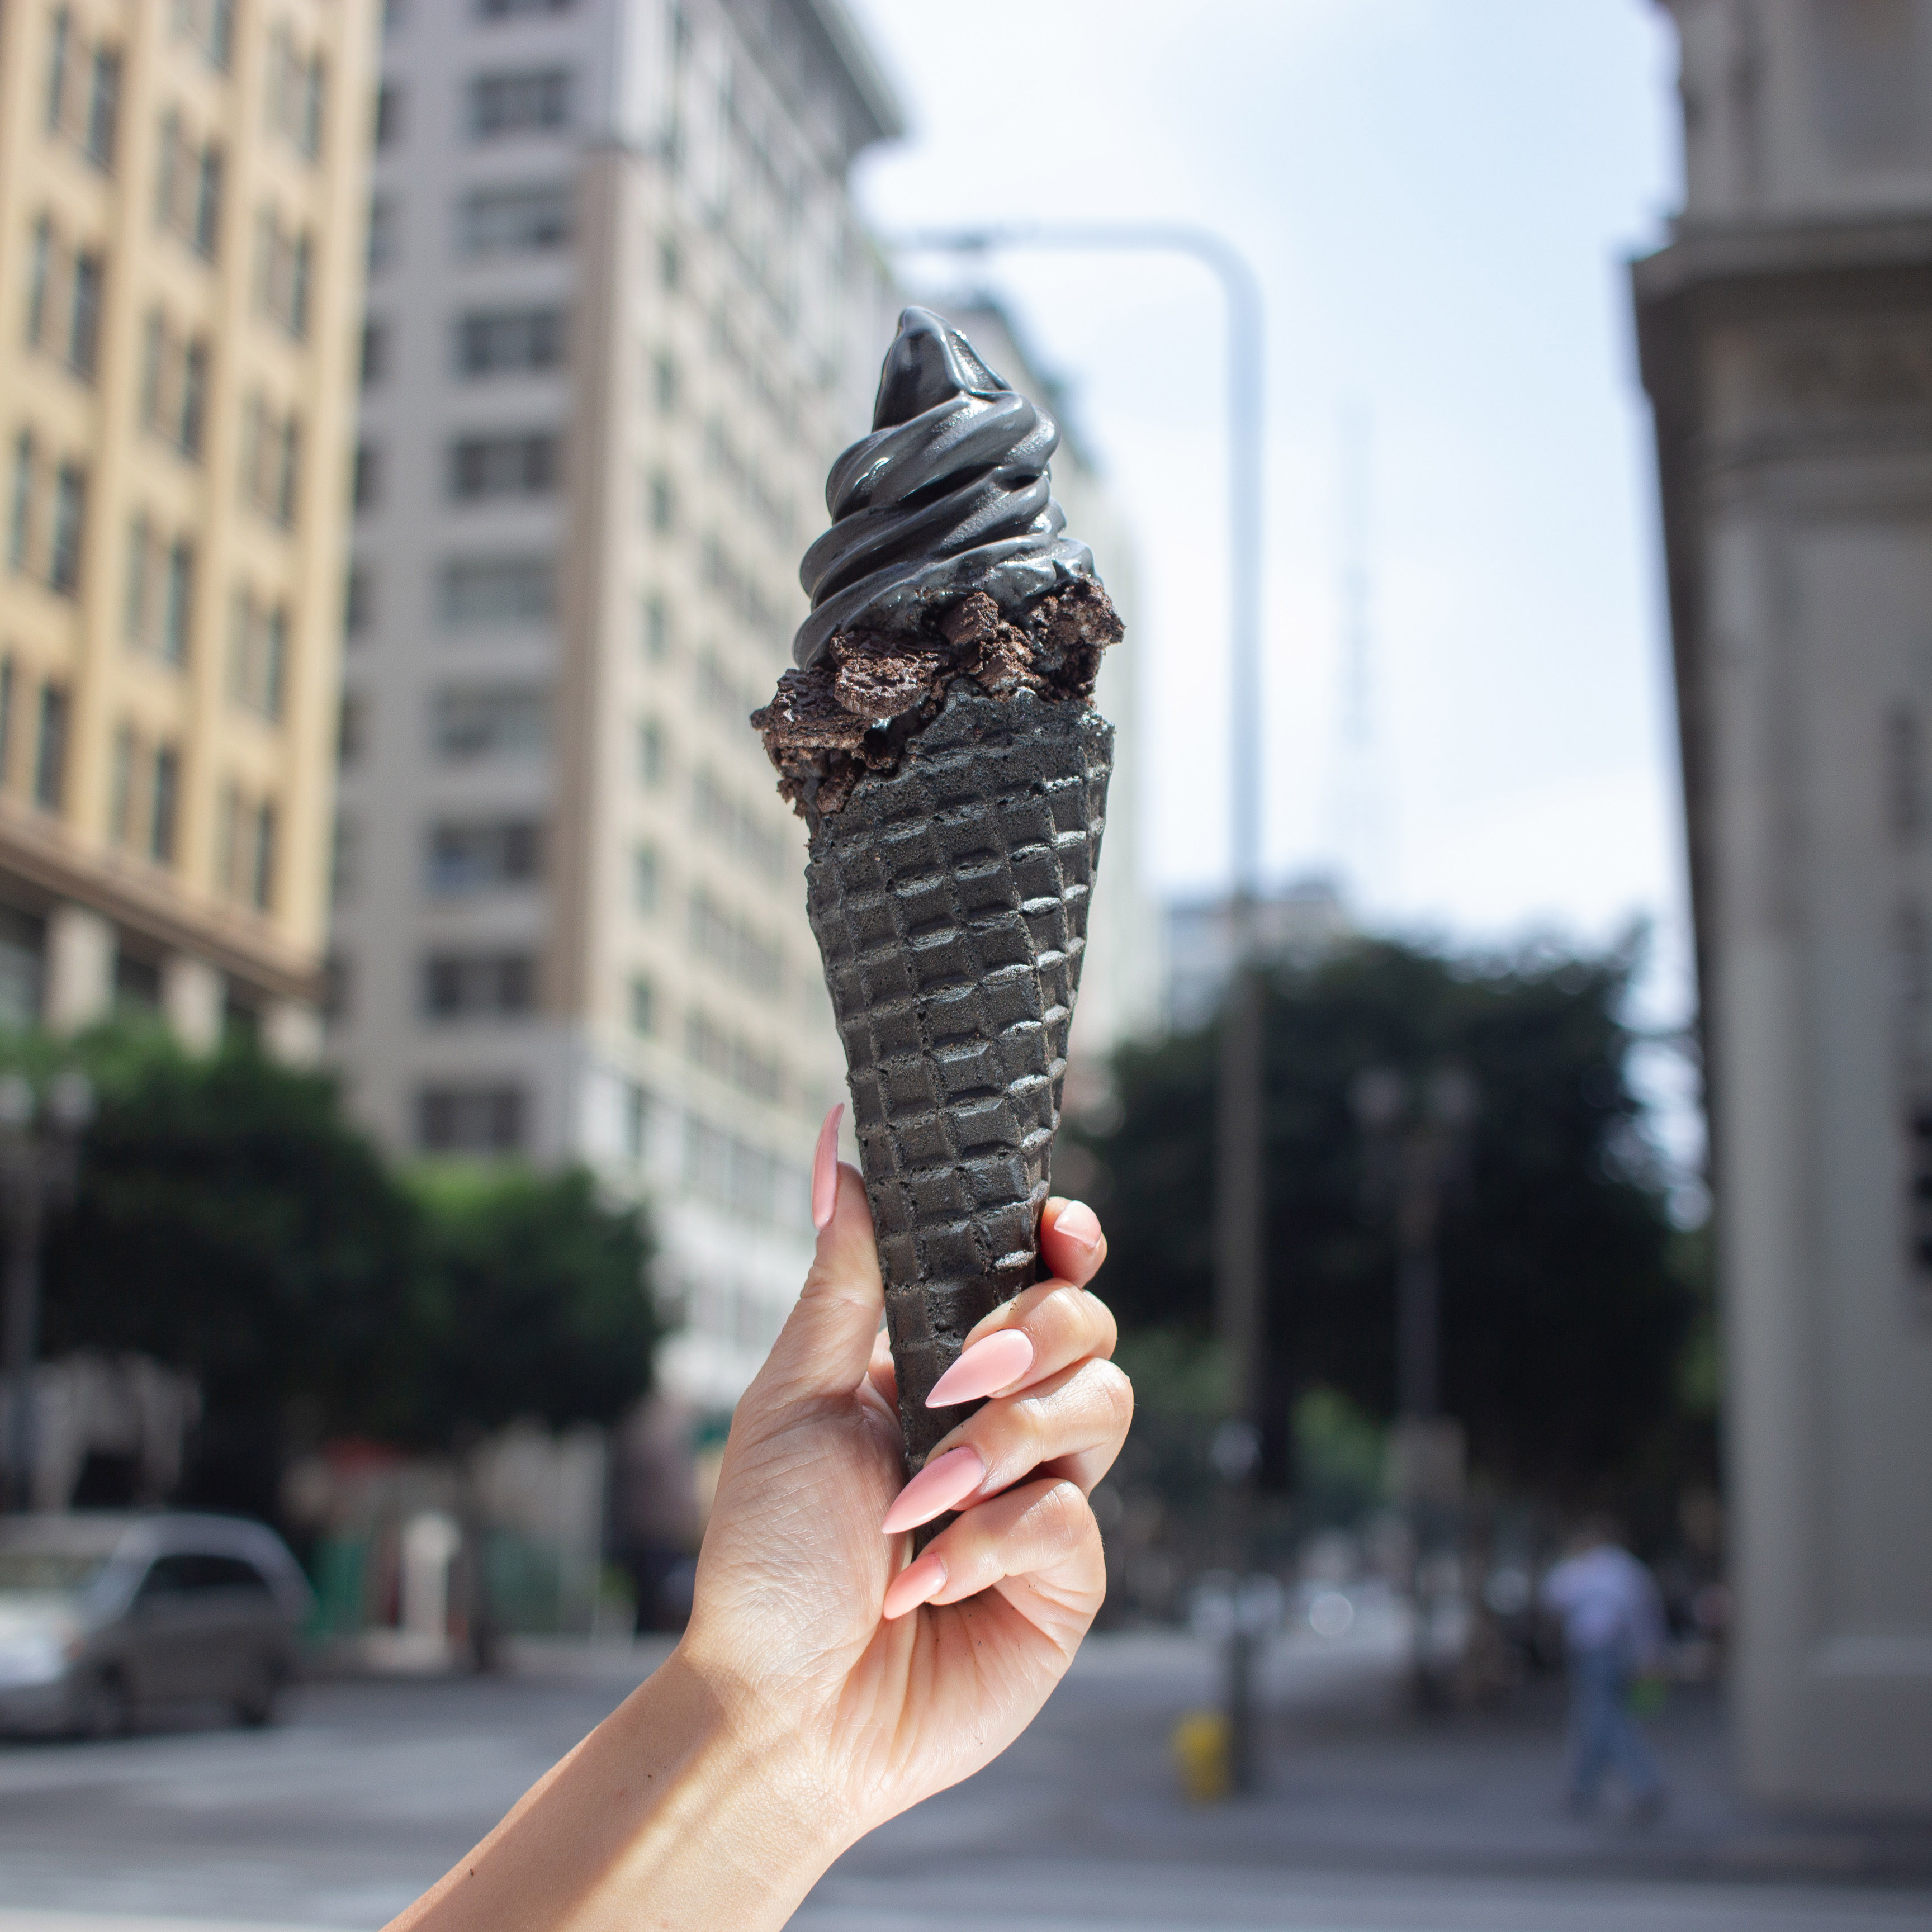 Little Damage – trendy soft-serve brand from the City of Angels arrives in Singapore in time for National Day - Alvinology